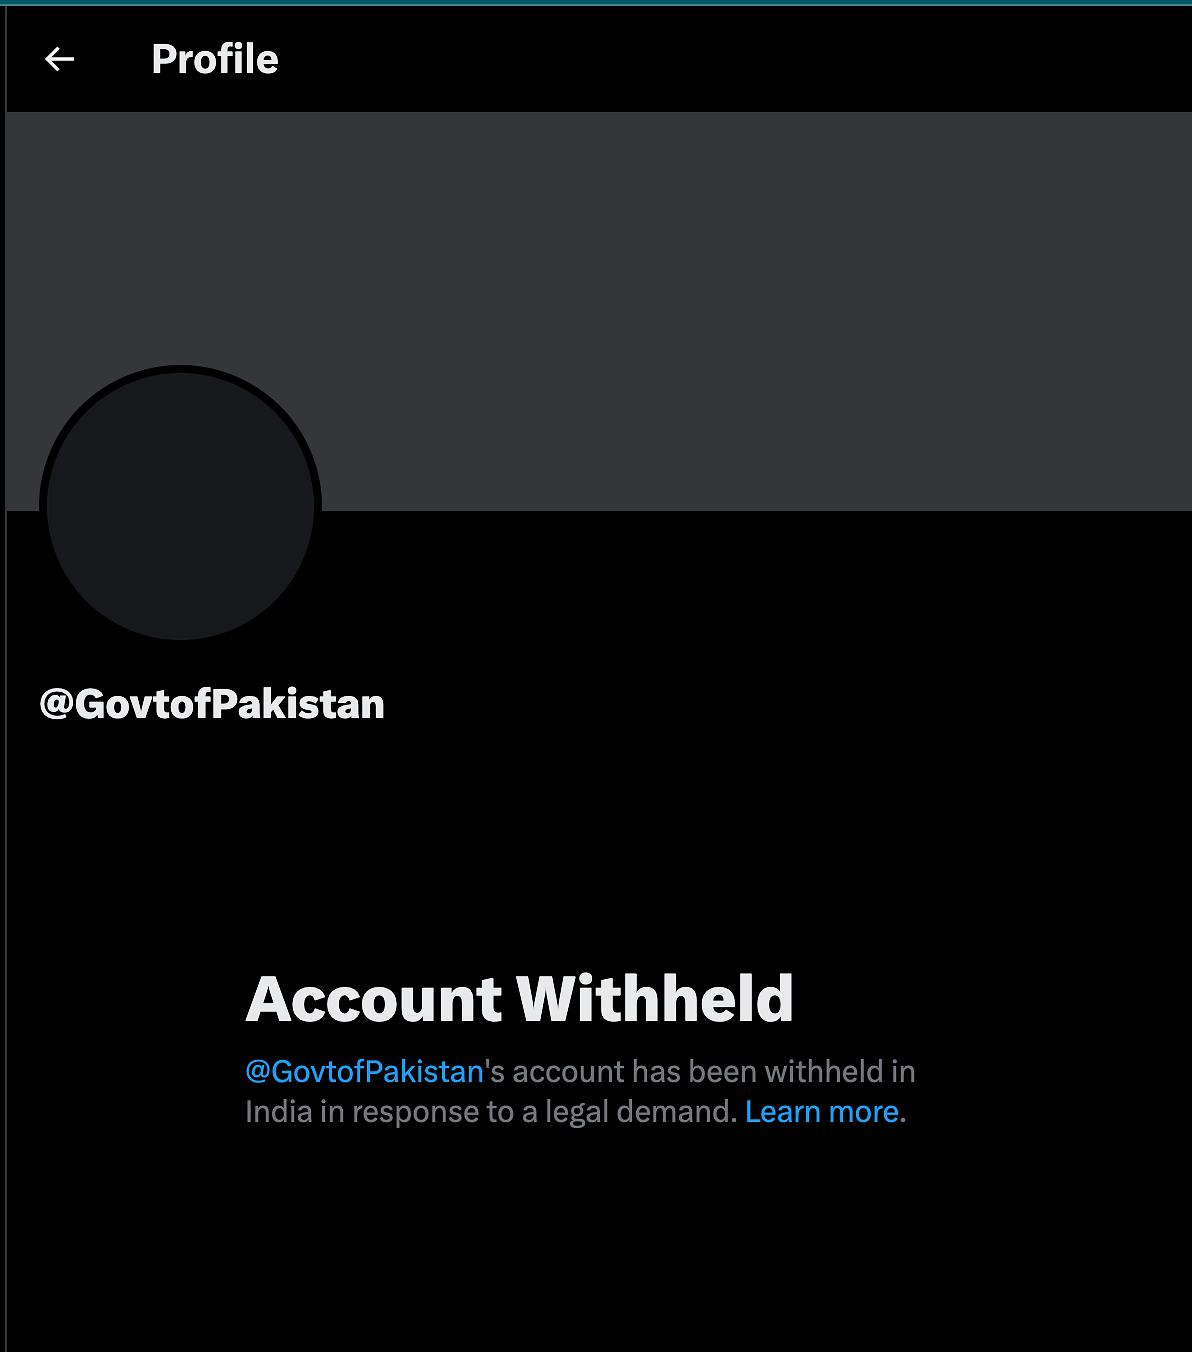 This is the third time that the account has been restricted in India, with past incidents in July and October 2022.